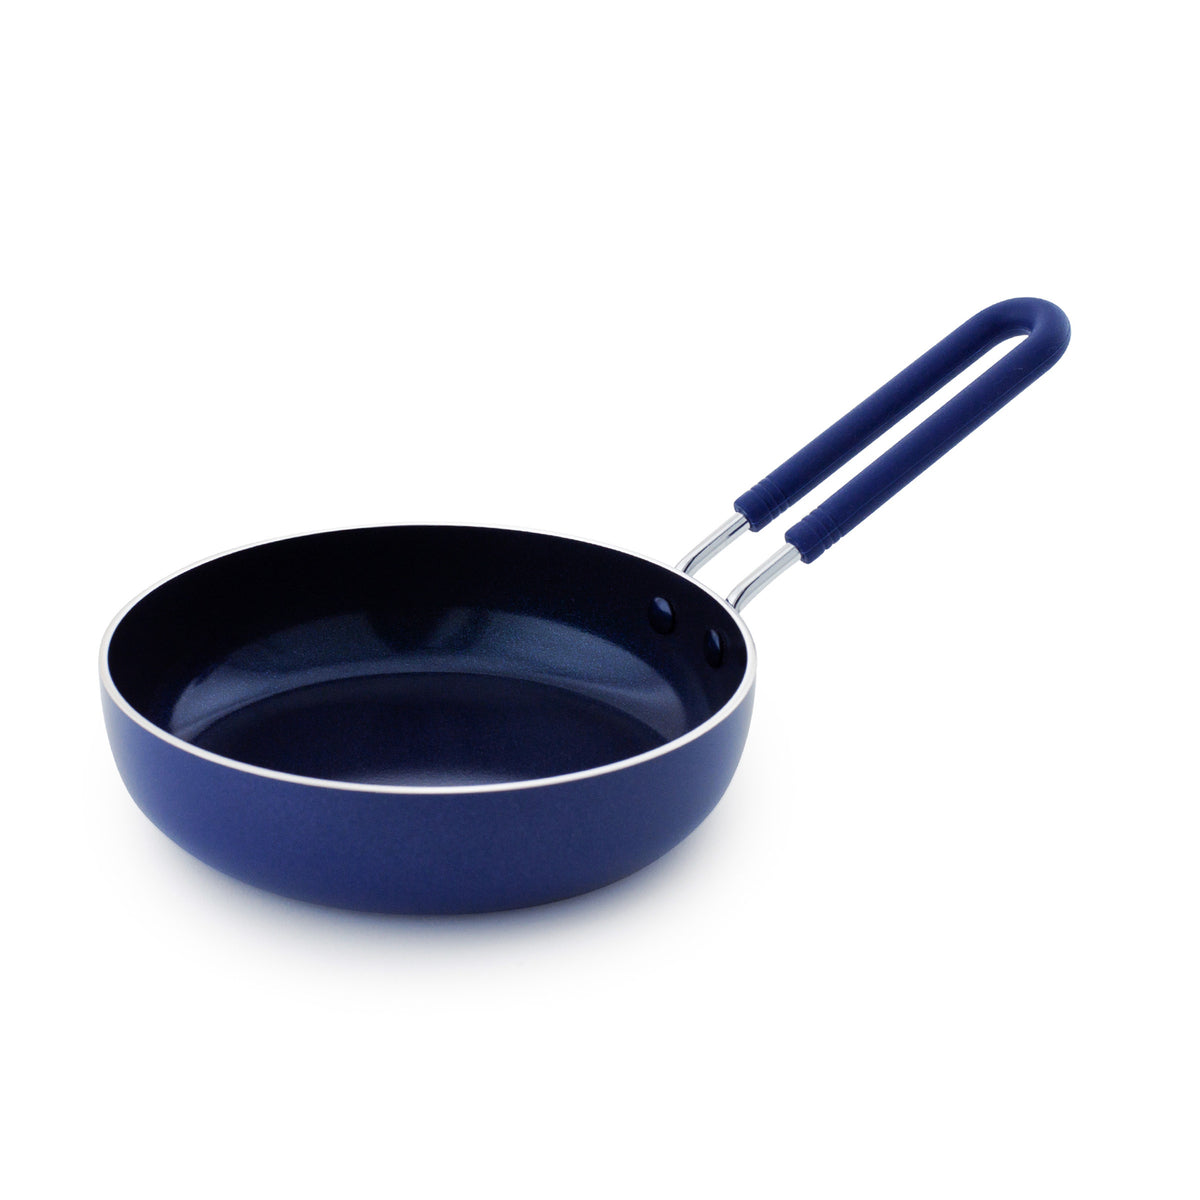 The Blue Diamond Nonstick Grill Pan Is Under $40 at